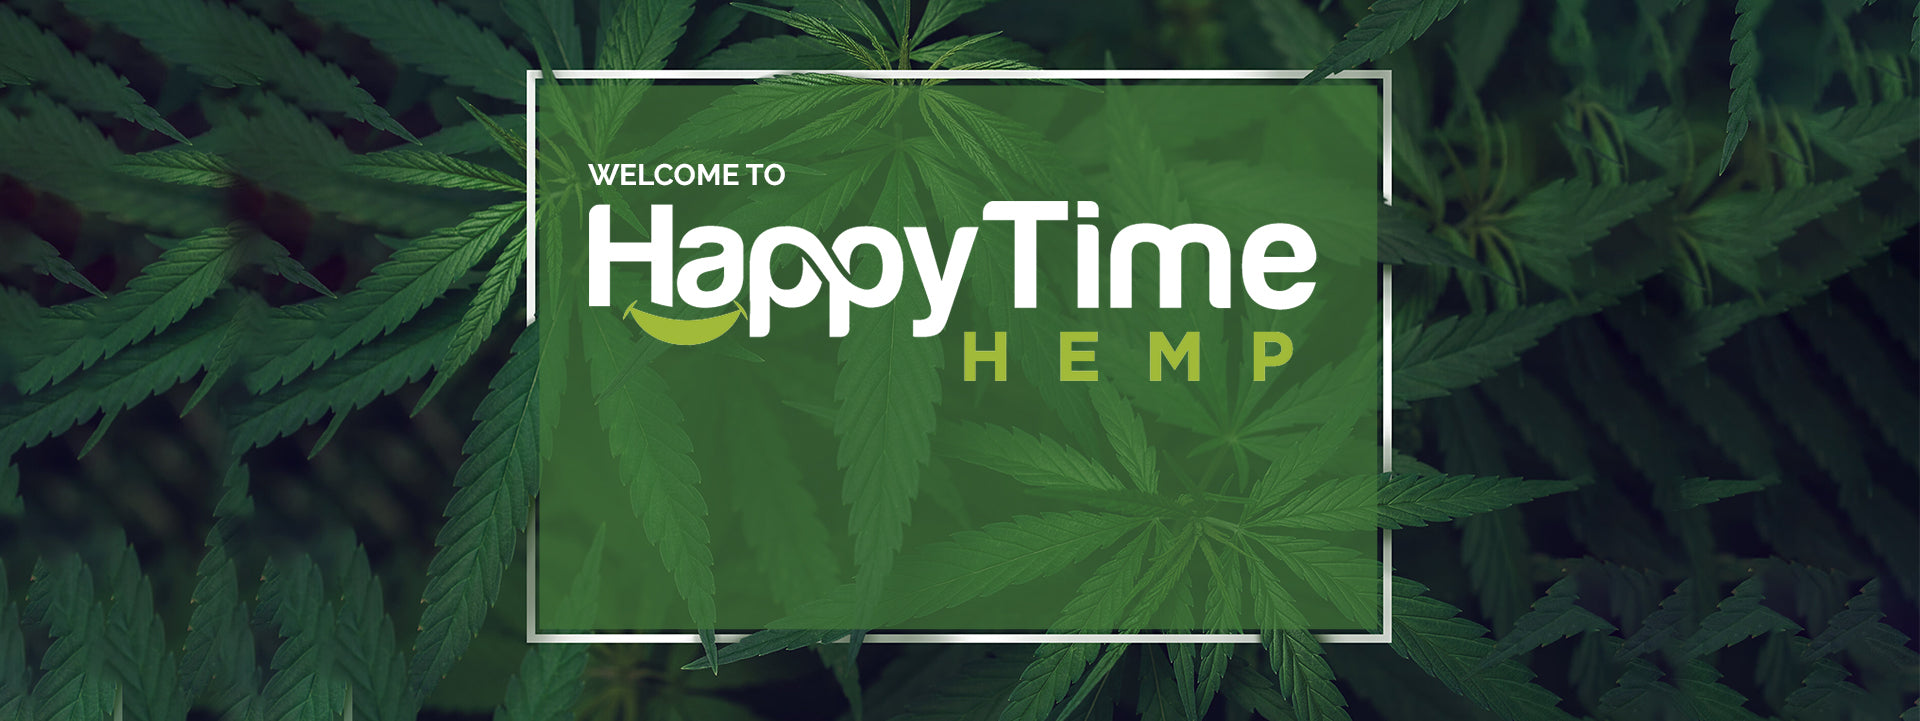 Welcome to Happy Time Hemp